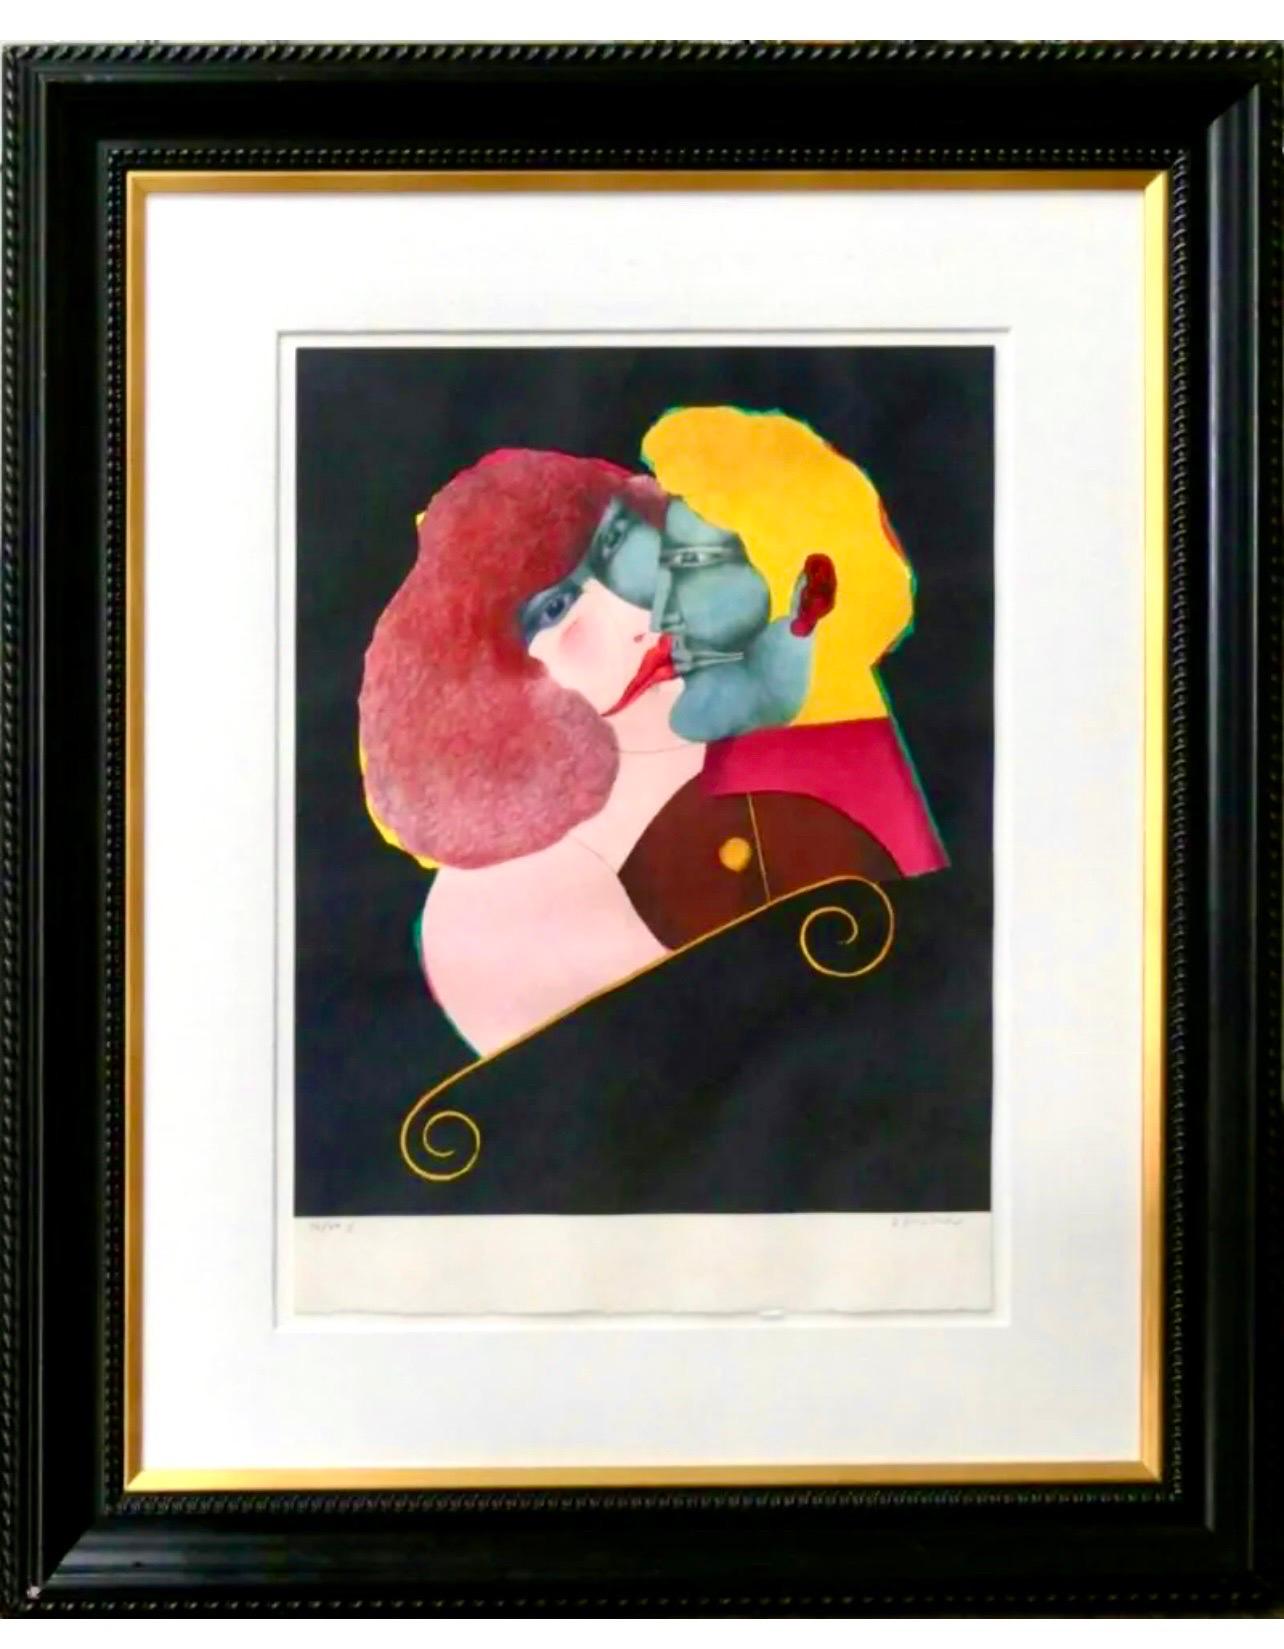 RICHARD LINDNER (American. 1901-1978) 
32/49 Hand Signed ithograph
Framed MEASURES 43" X 57" IMAGE MEASURES 26" X 20"



Richard Lindner was born in Hamburg, Germany. In 1905 the family moved to Nuremberg, where Lindners mother was owner of a